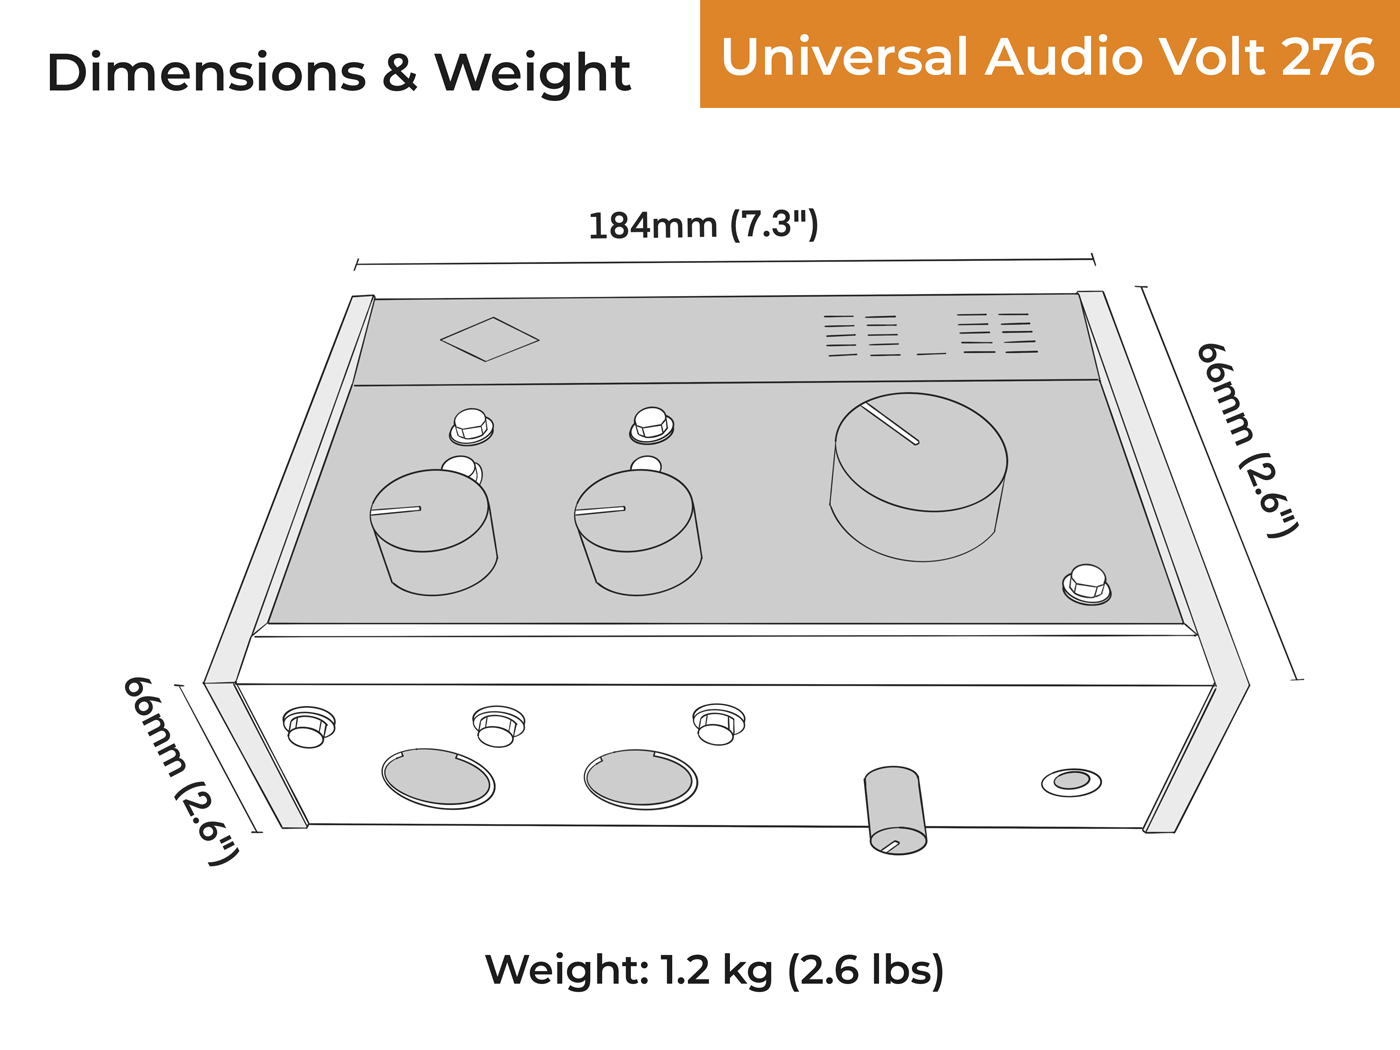 Universal Audio Volt 276 - dimensions and weight